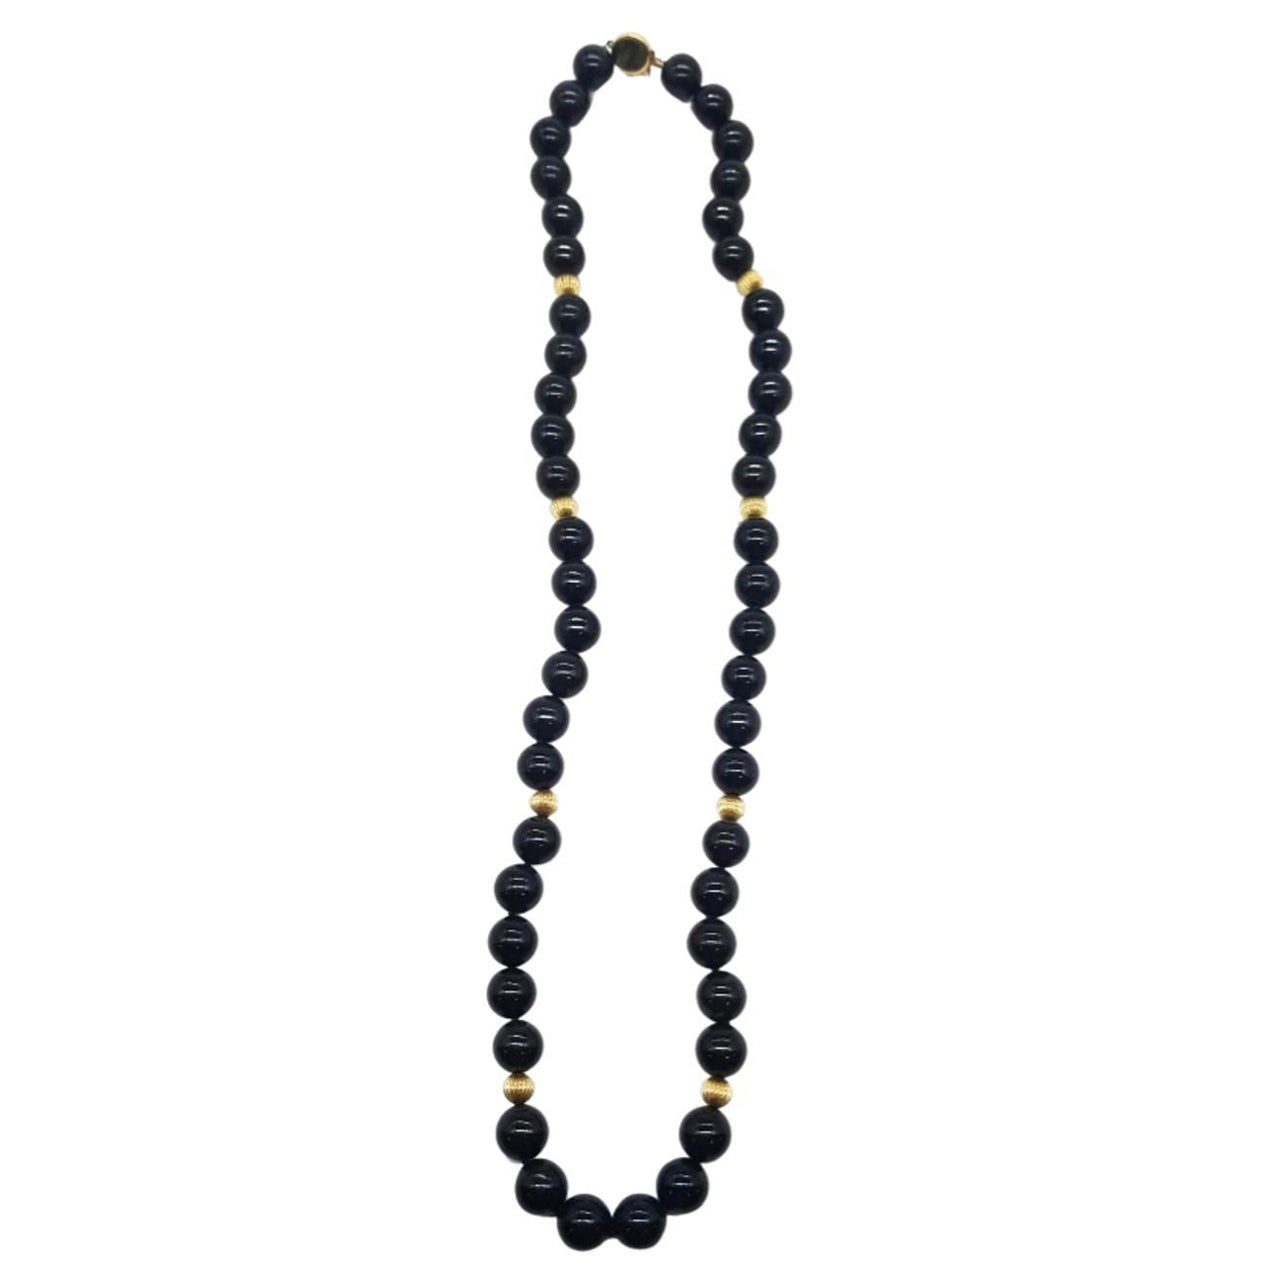 Obsidian and Gold Beaded Necklace 14k Gold 26.5" Long